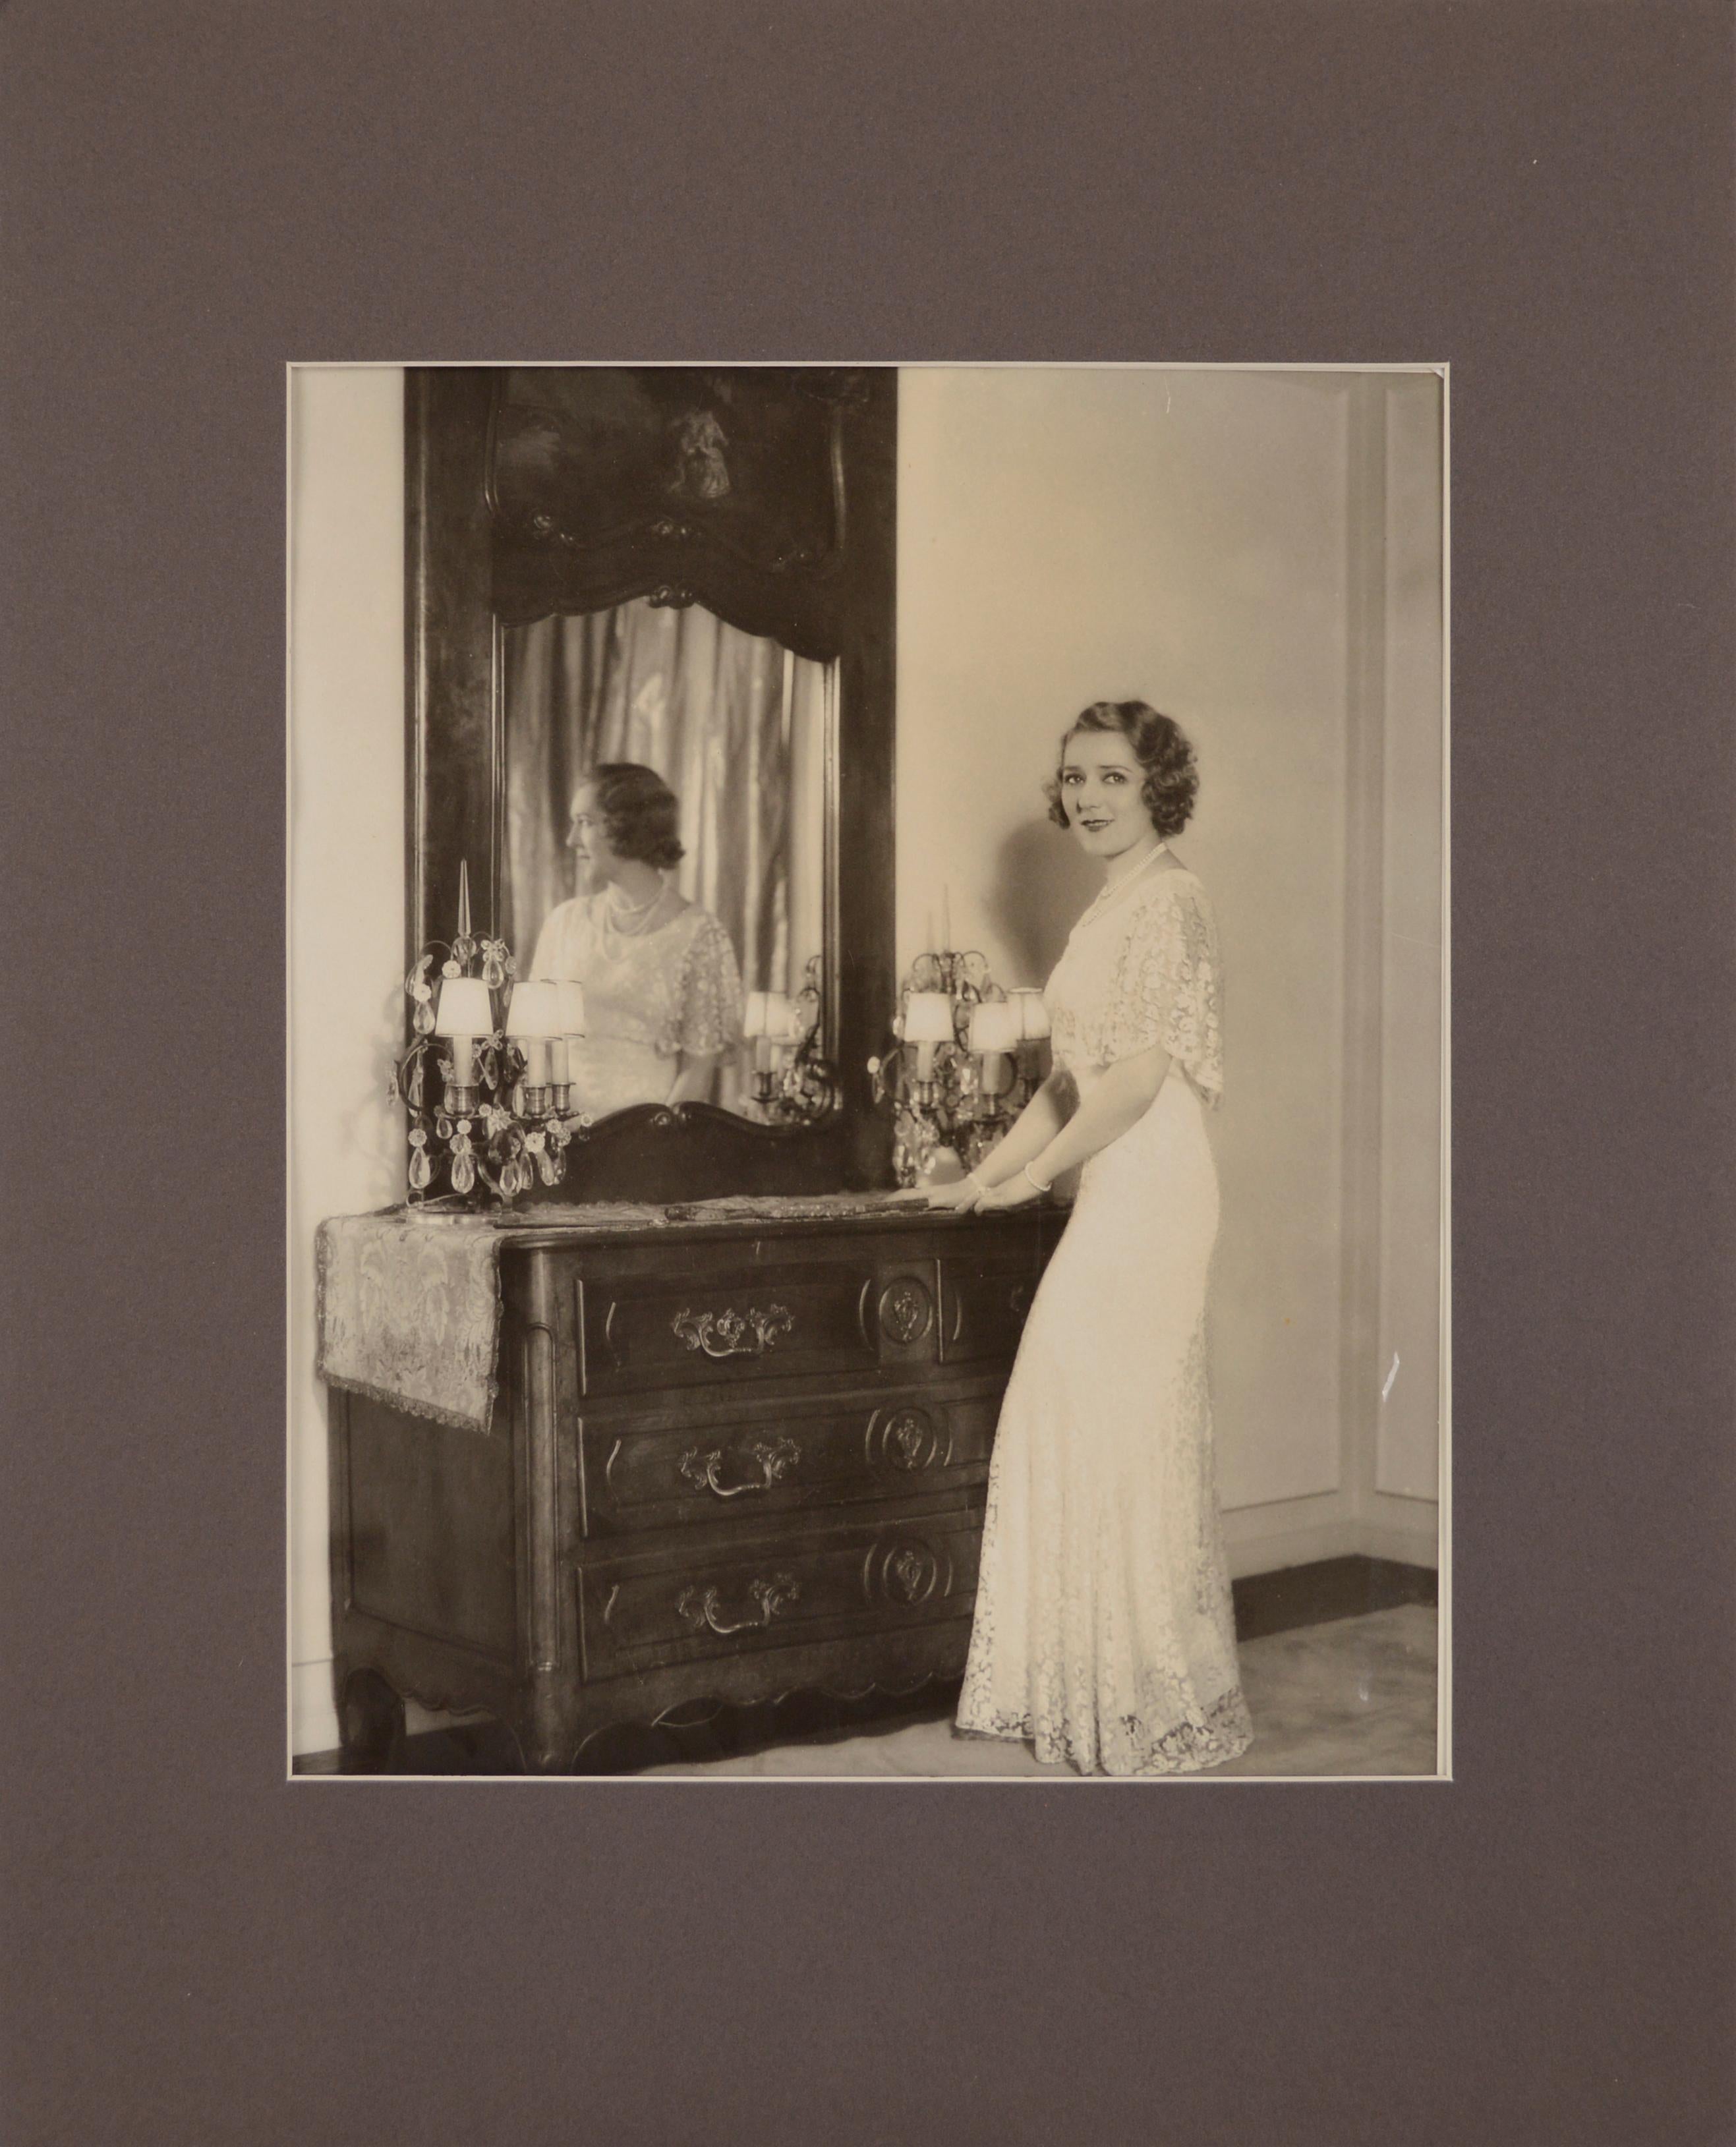 Unknown Figurative Photograph - Mary Pickford Standing by a Mirrored Dresser - B&W Photo